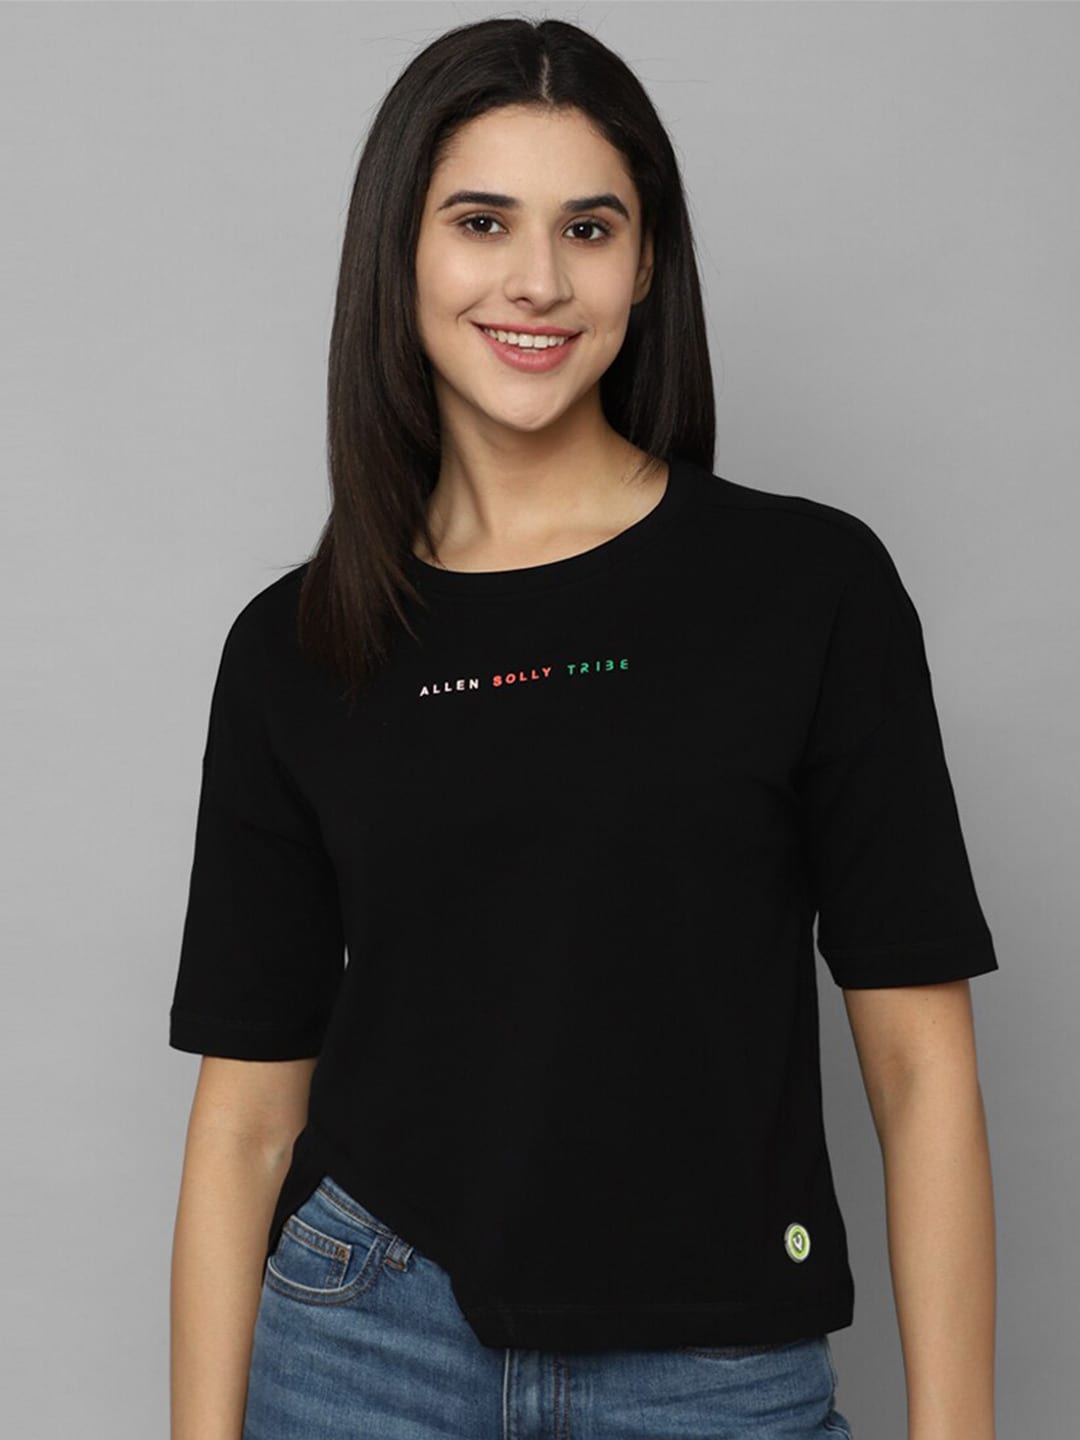 Allen Solly Woman Typography Printed T-shirt Price in India